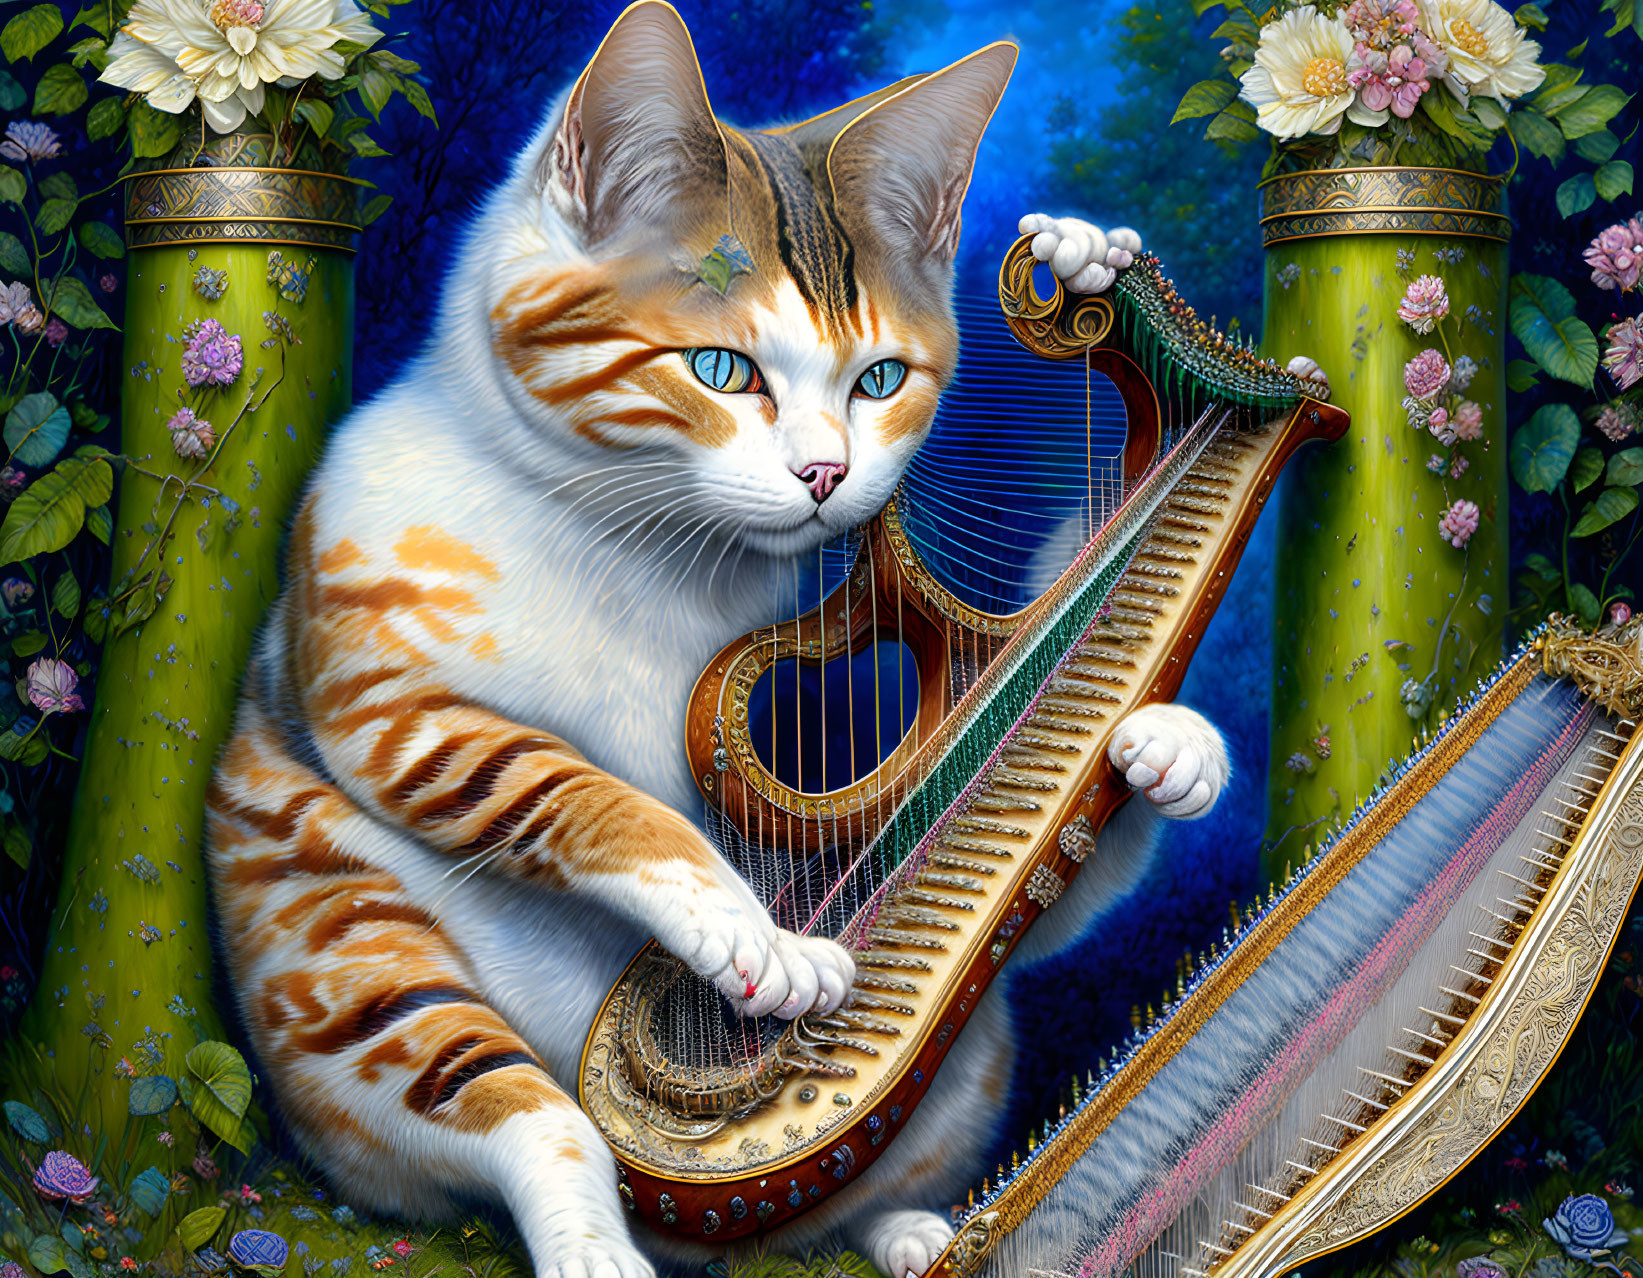 Bicolour cat playing harp. extreme details, full f